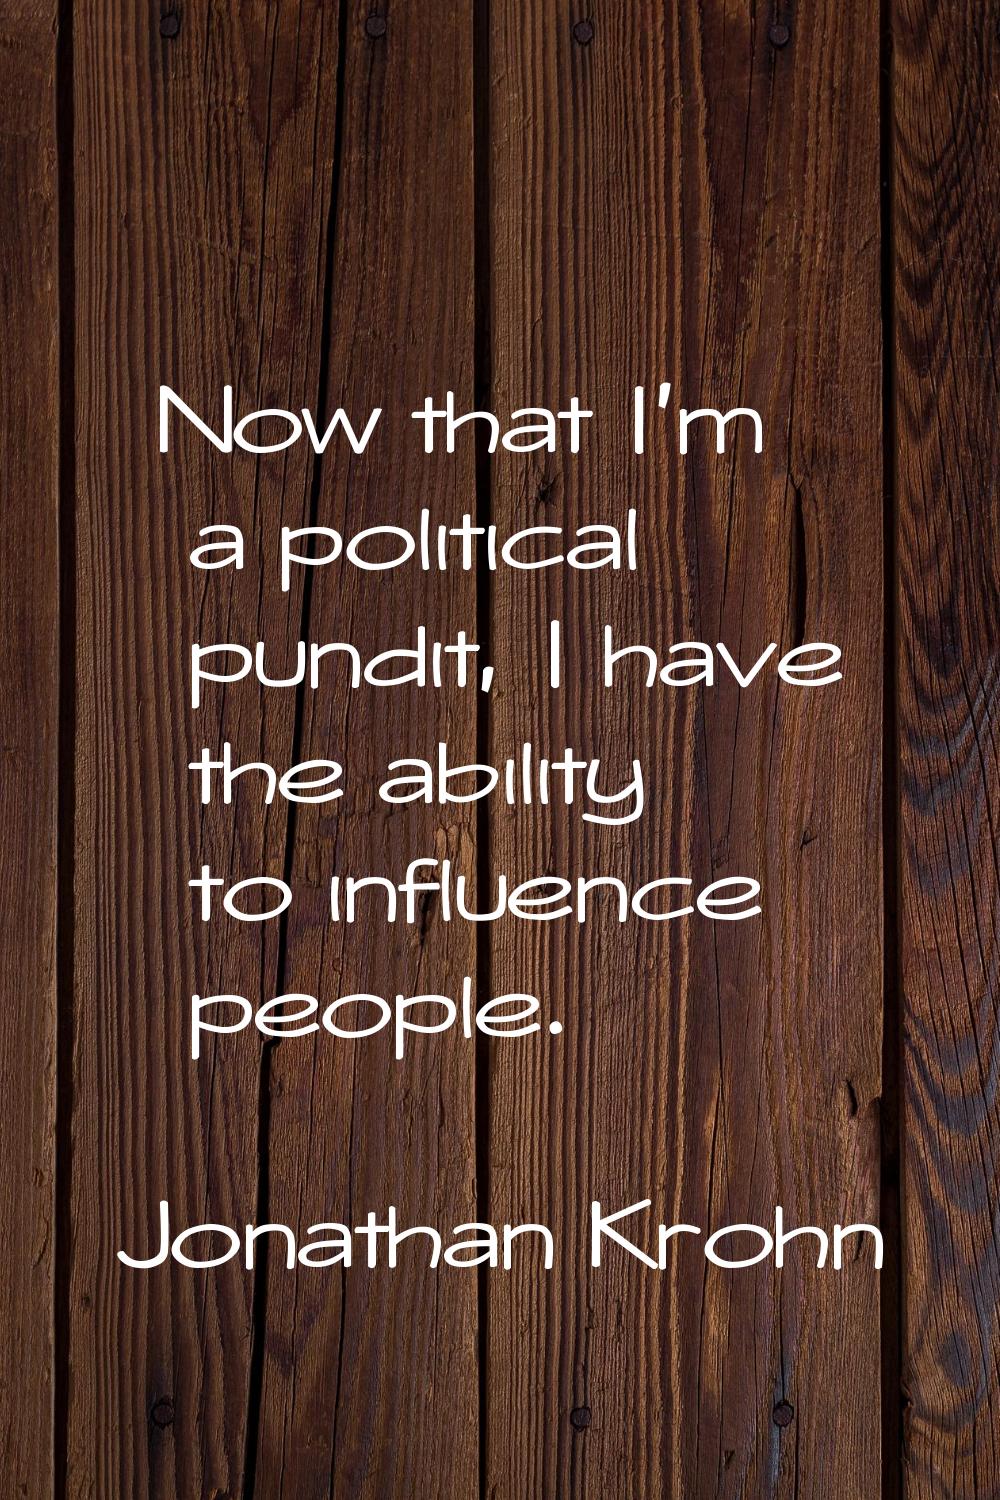 Now that I'm a political pundit, I have the ability to influence people.